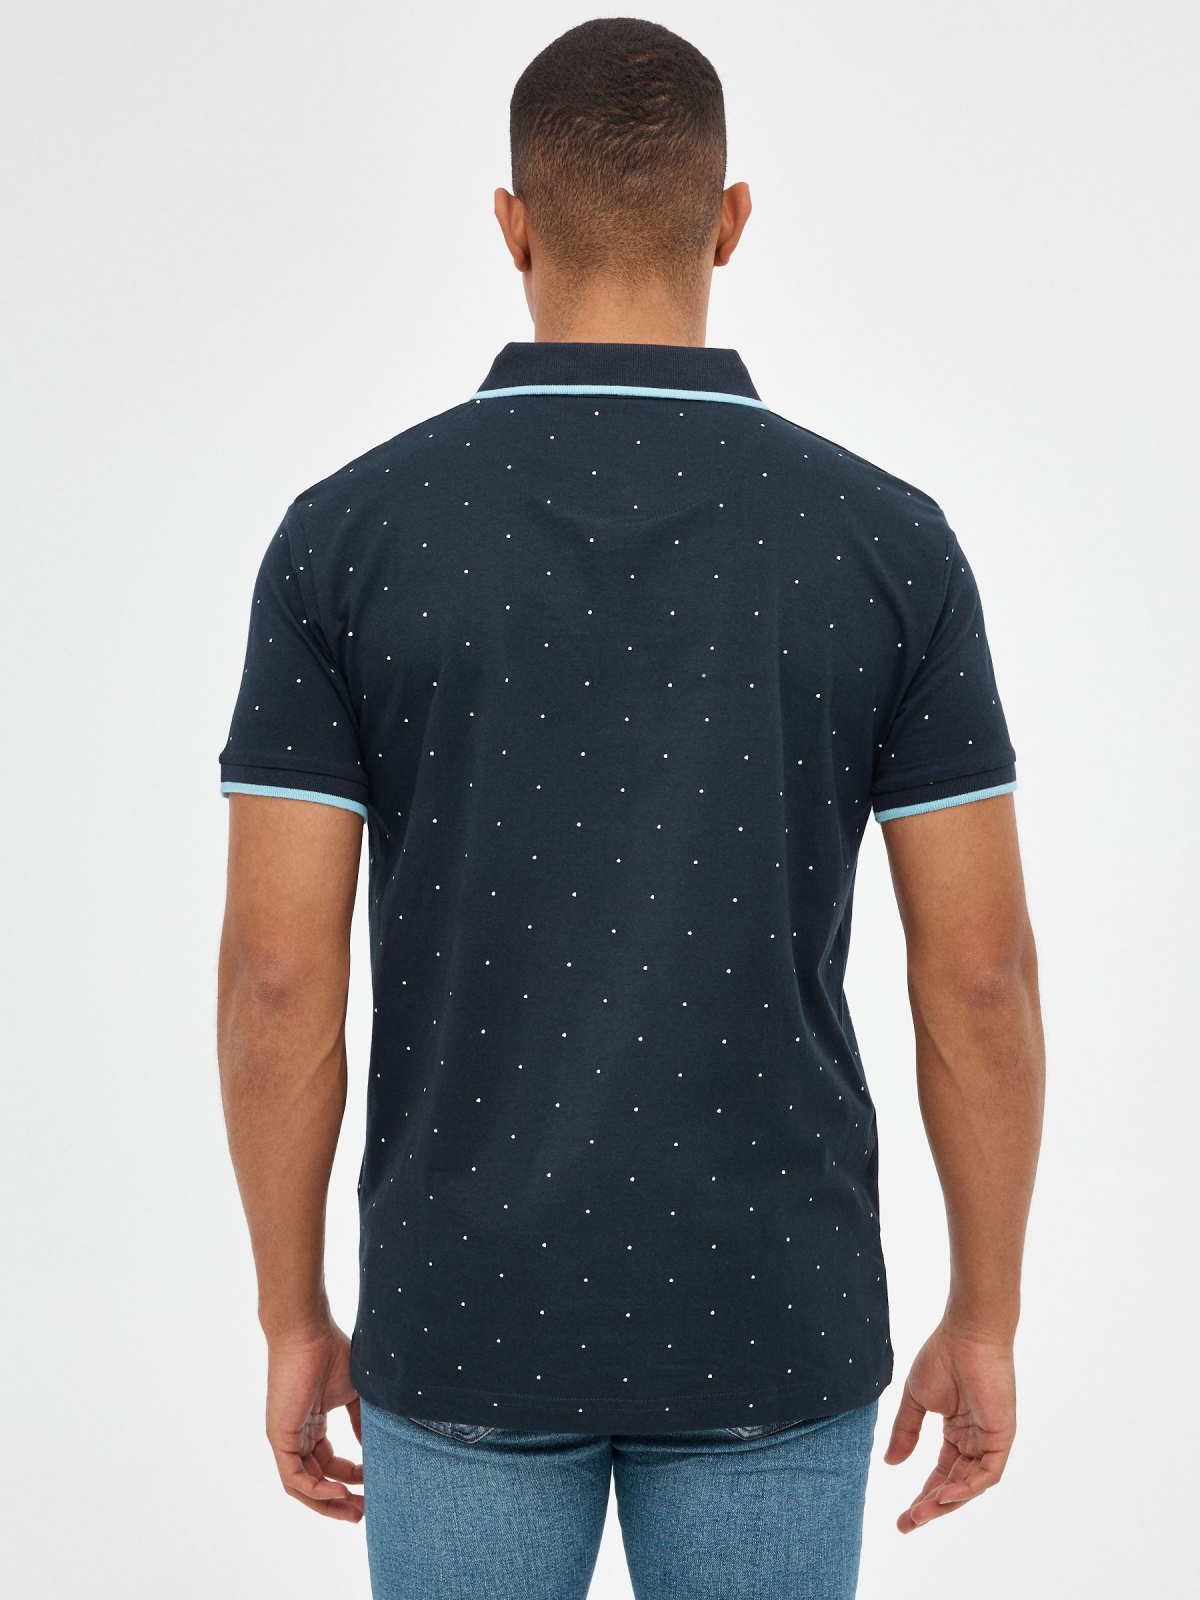 Miniprint printed polo shirt navy middle back view